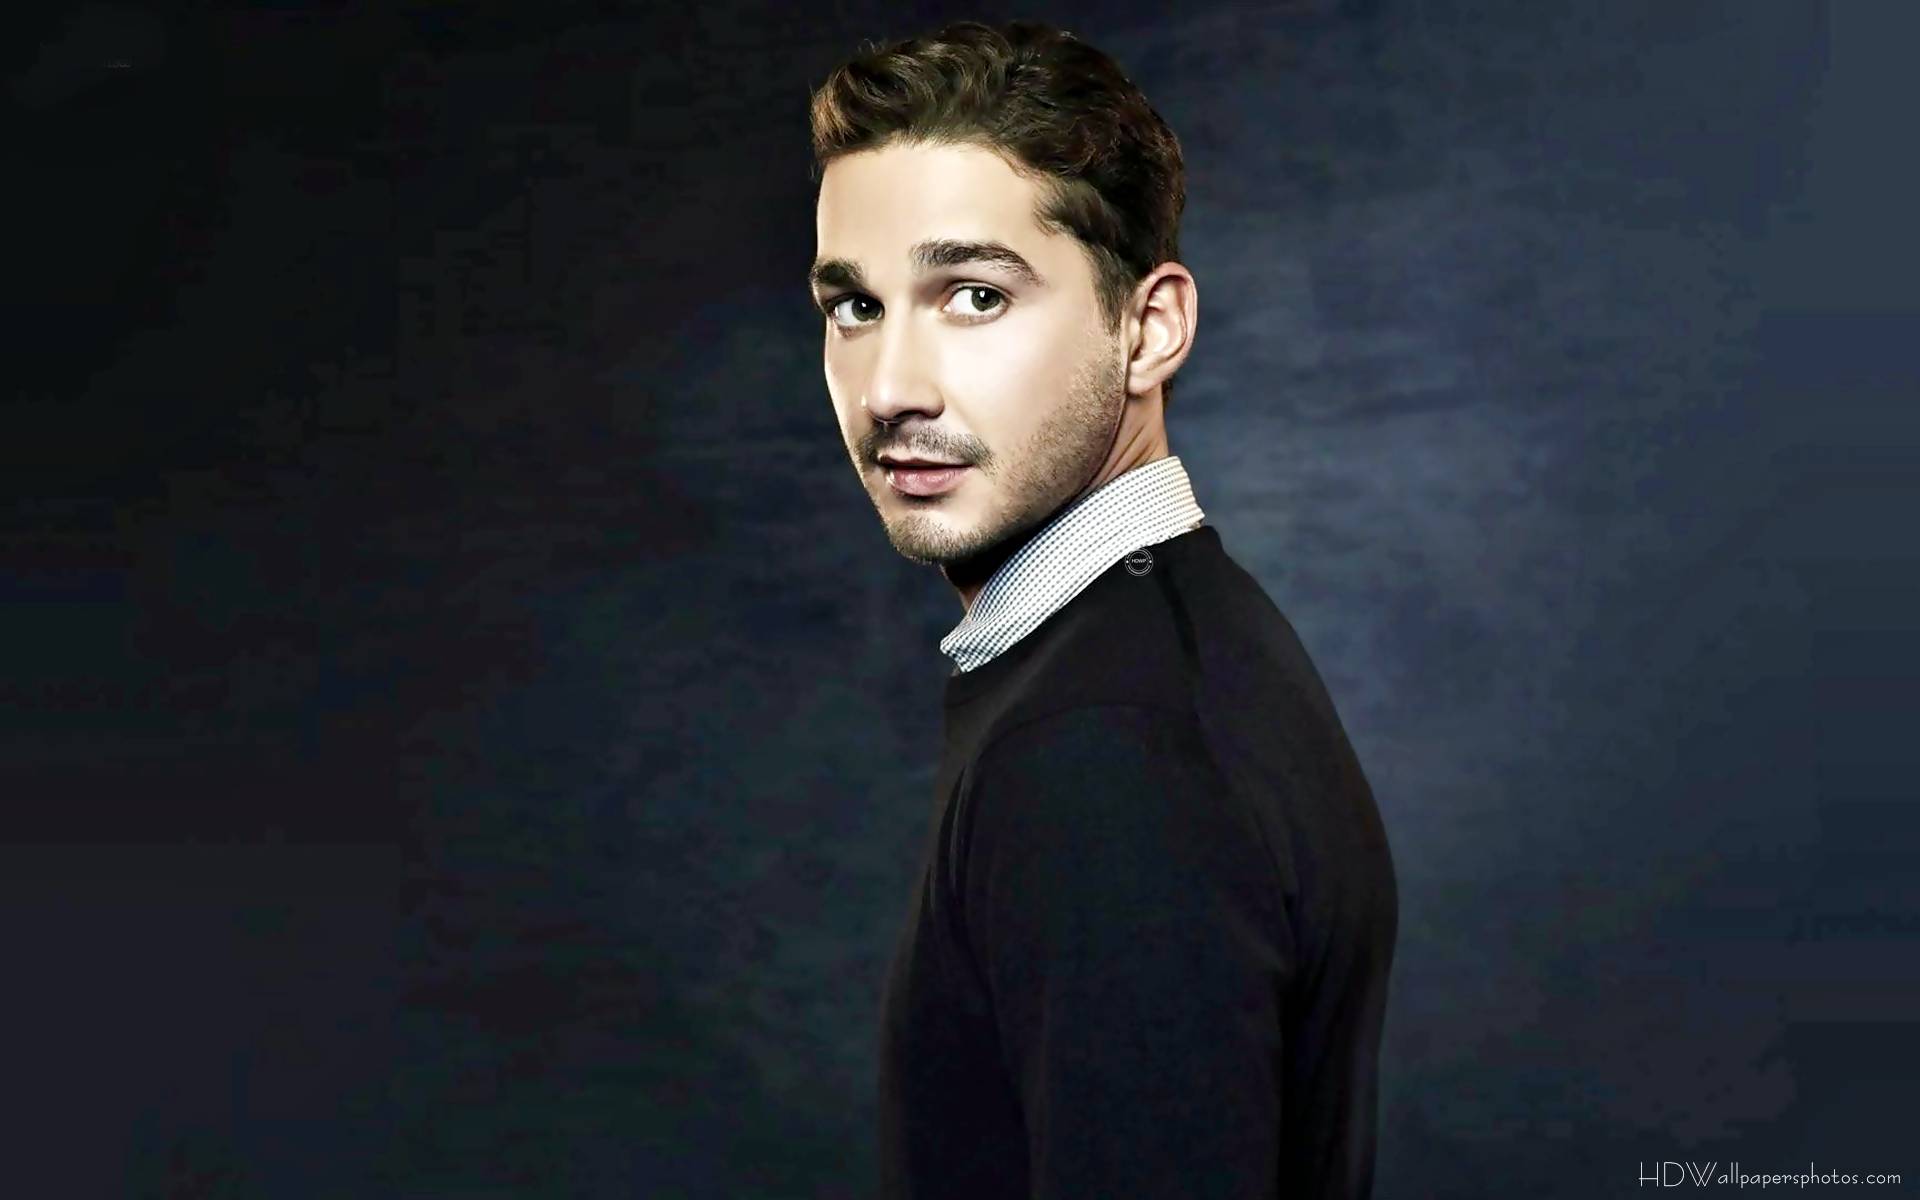 Shia Labeouf HD Wallpaper Image Pictures